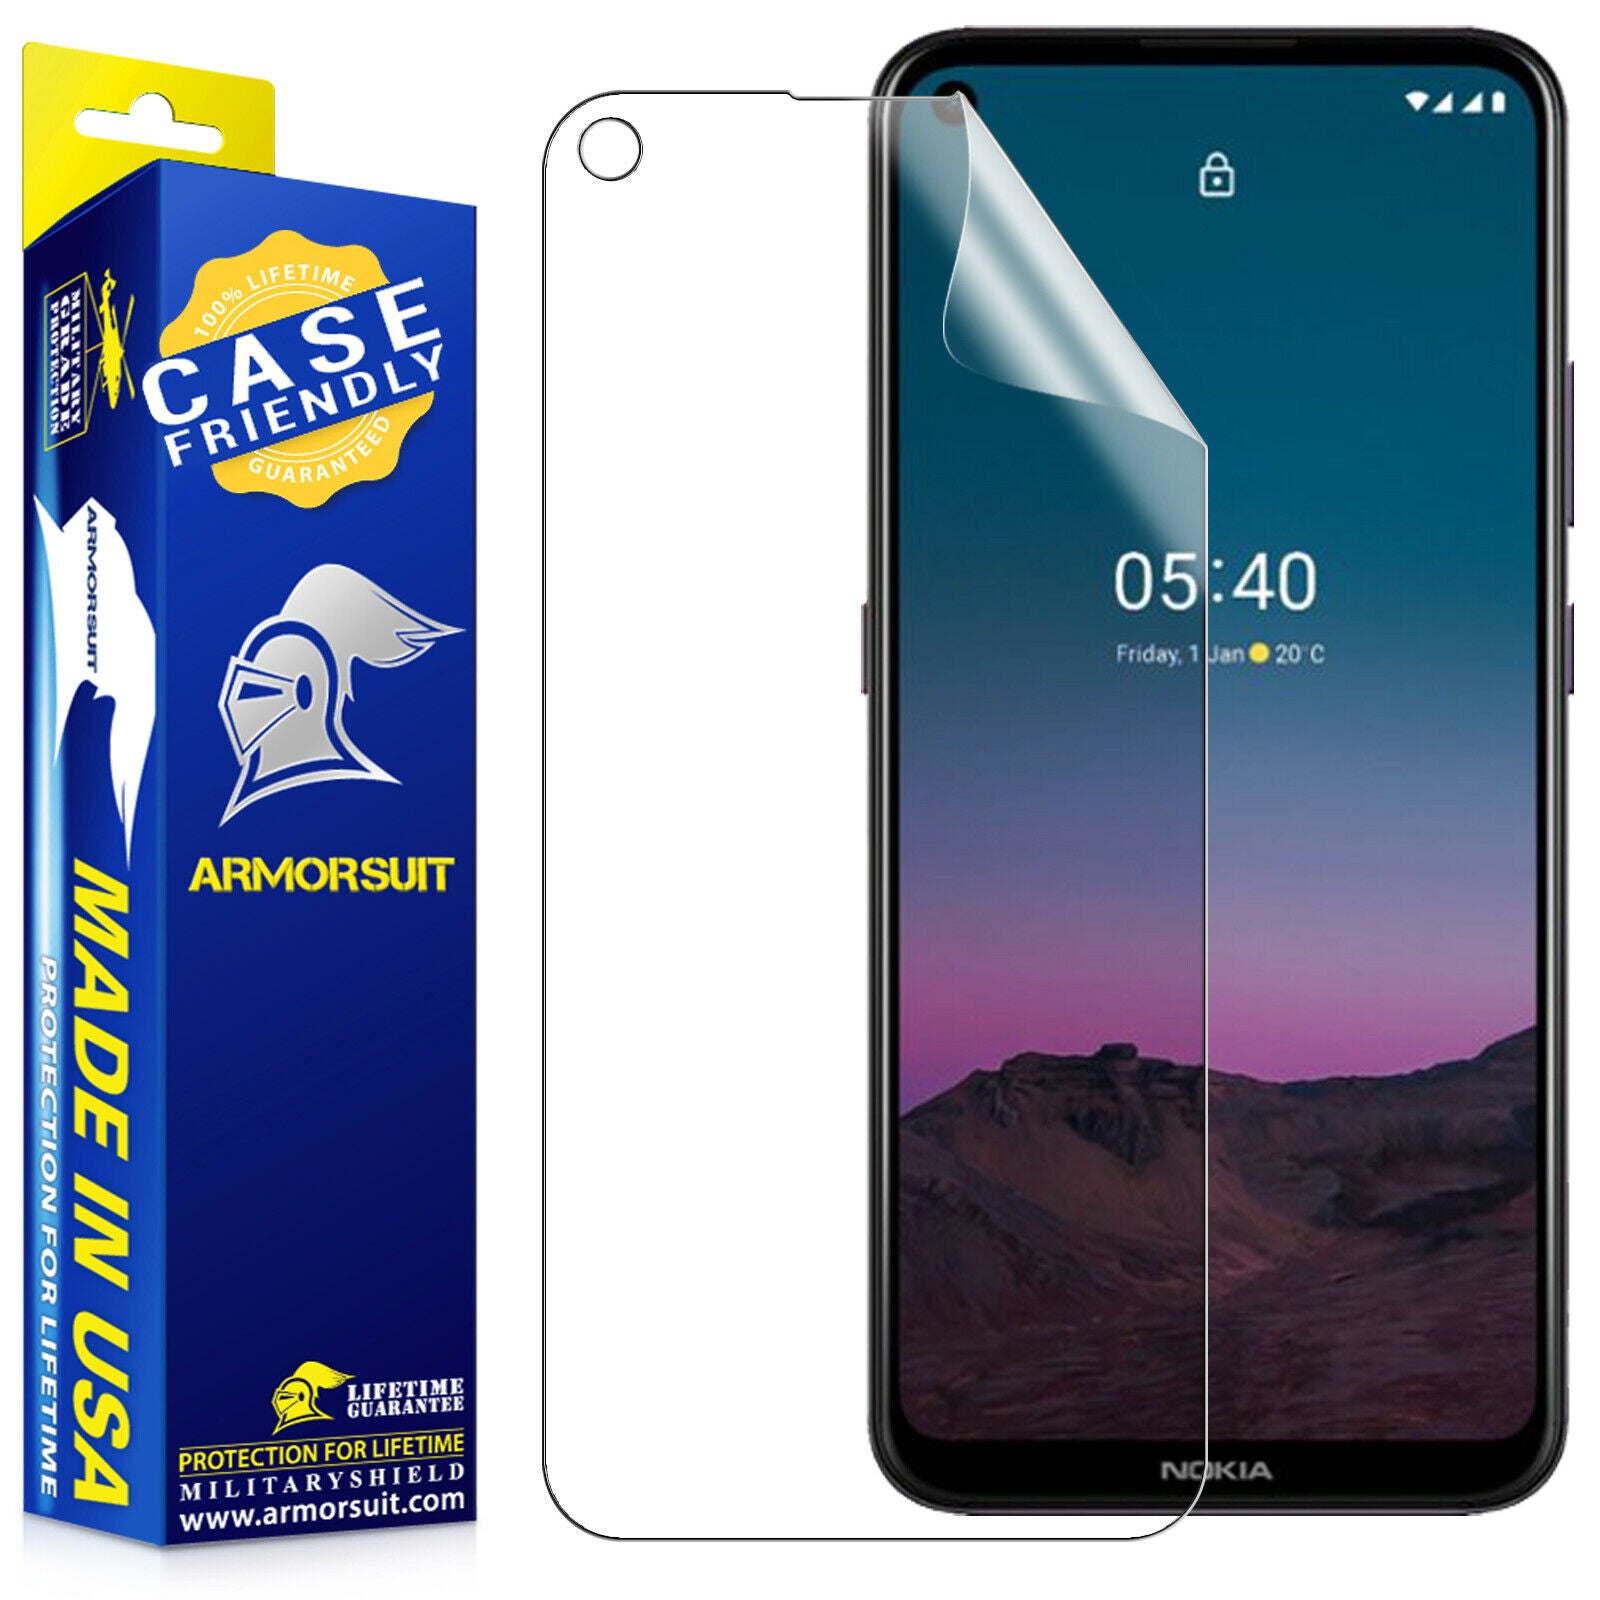 [2 Pack] Nokia 5.4 (2021) Screen Protector - Case-Friendly Matte